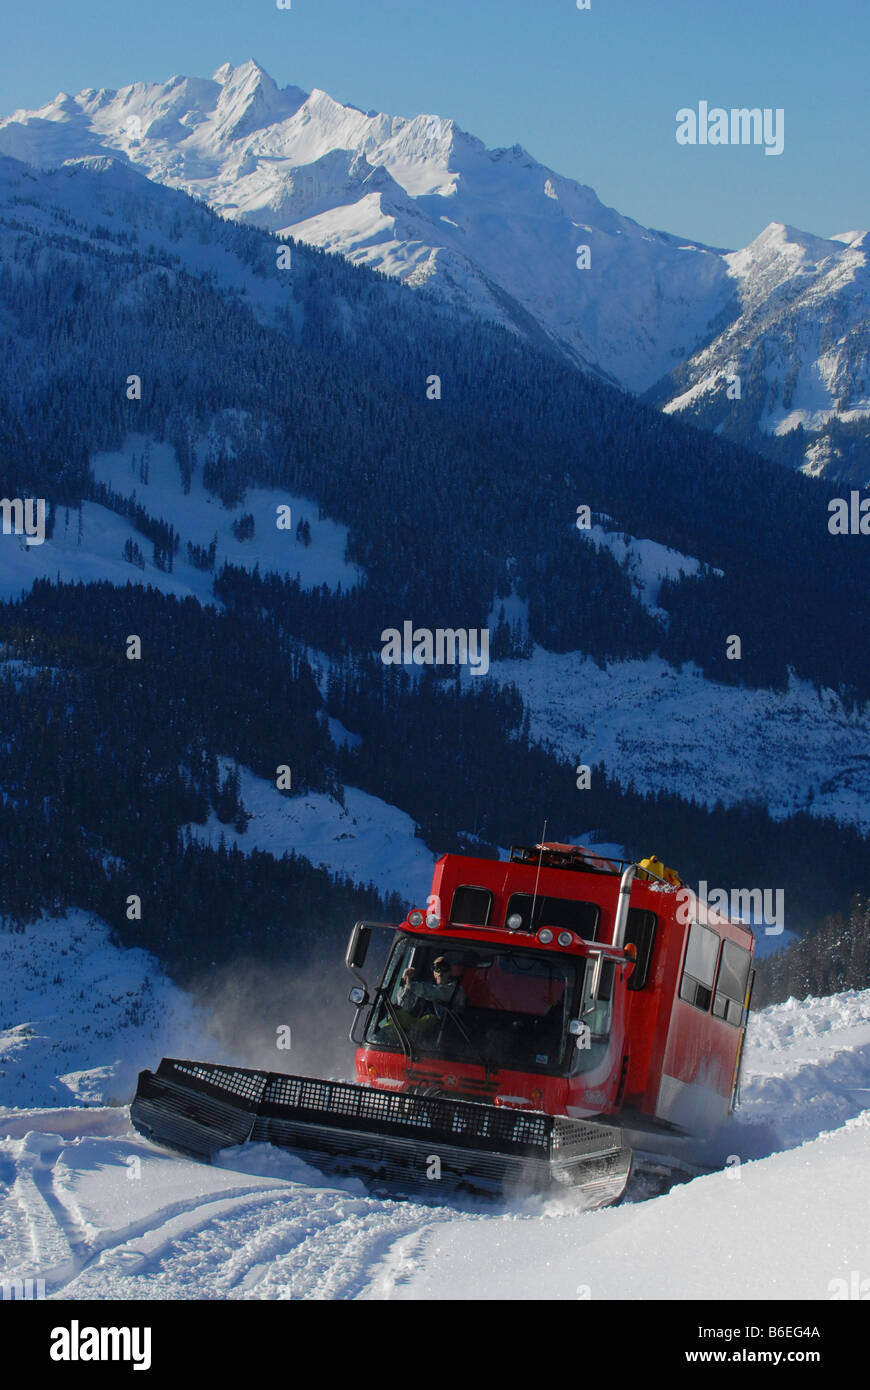 Snow cat at Powder Mountain Cat skiing In Whistler, BC, Canada Stock Photo